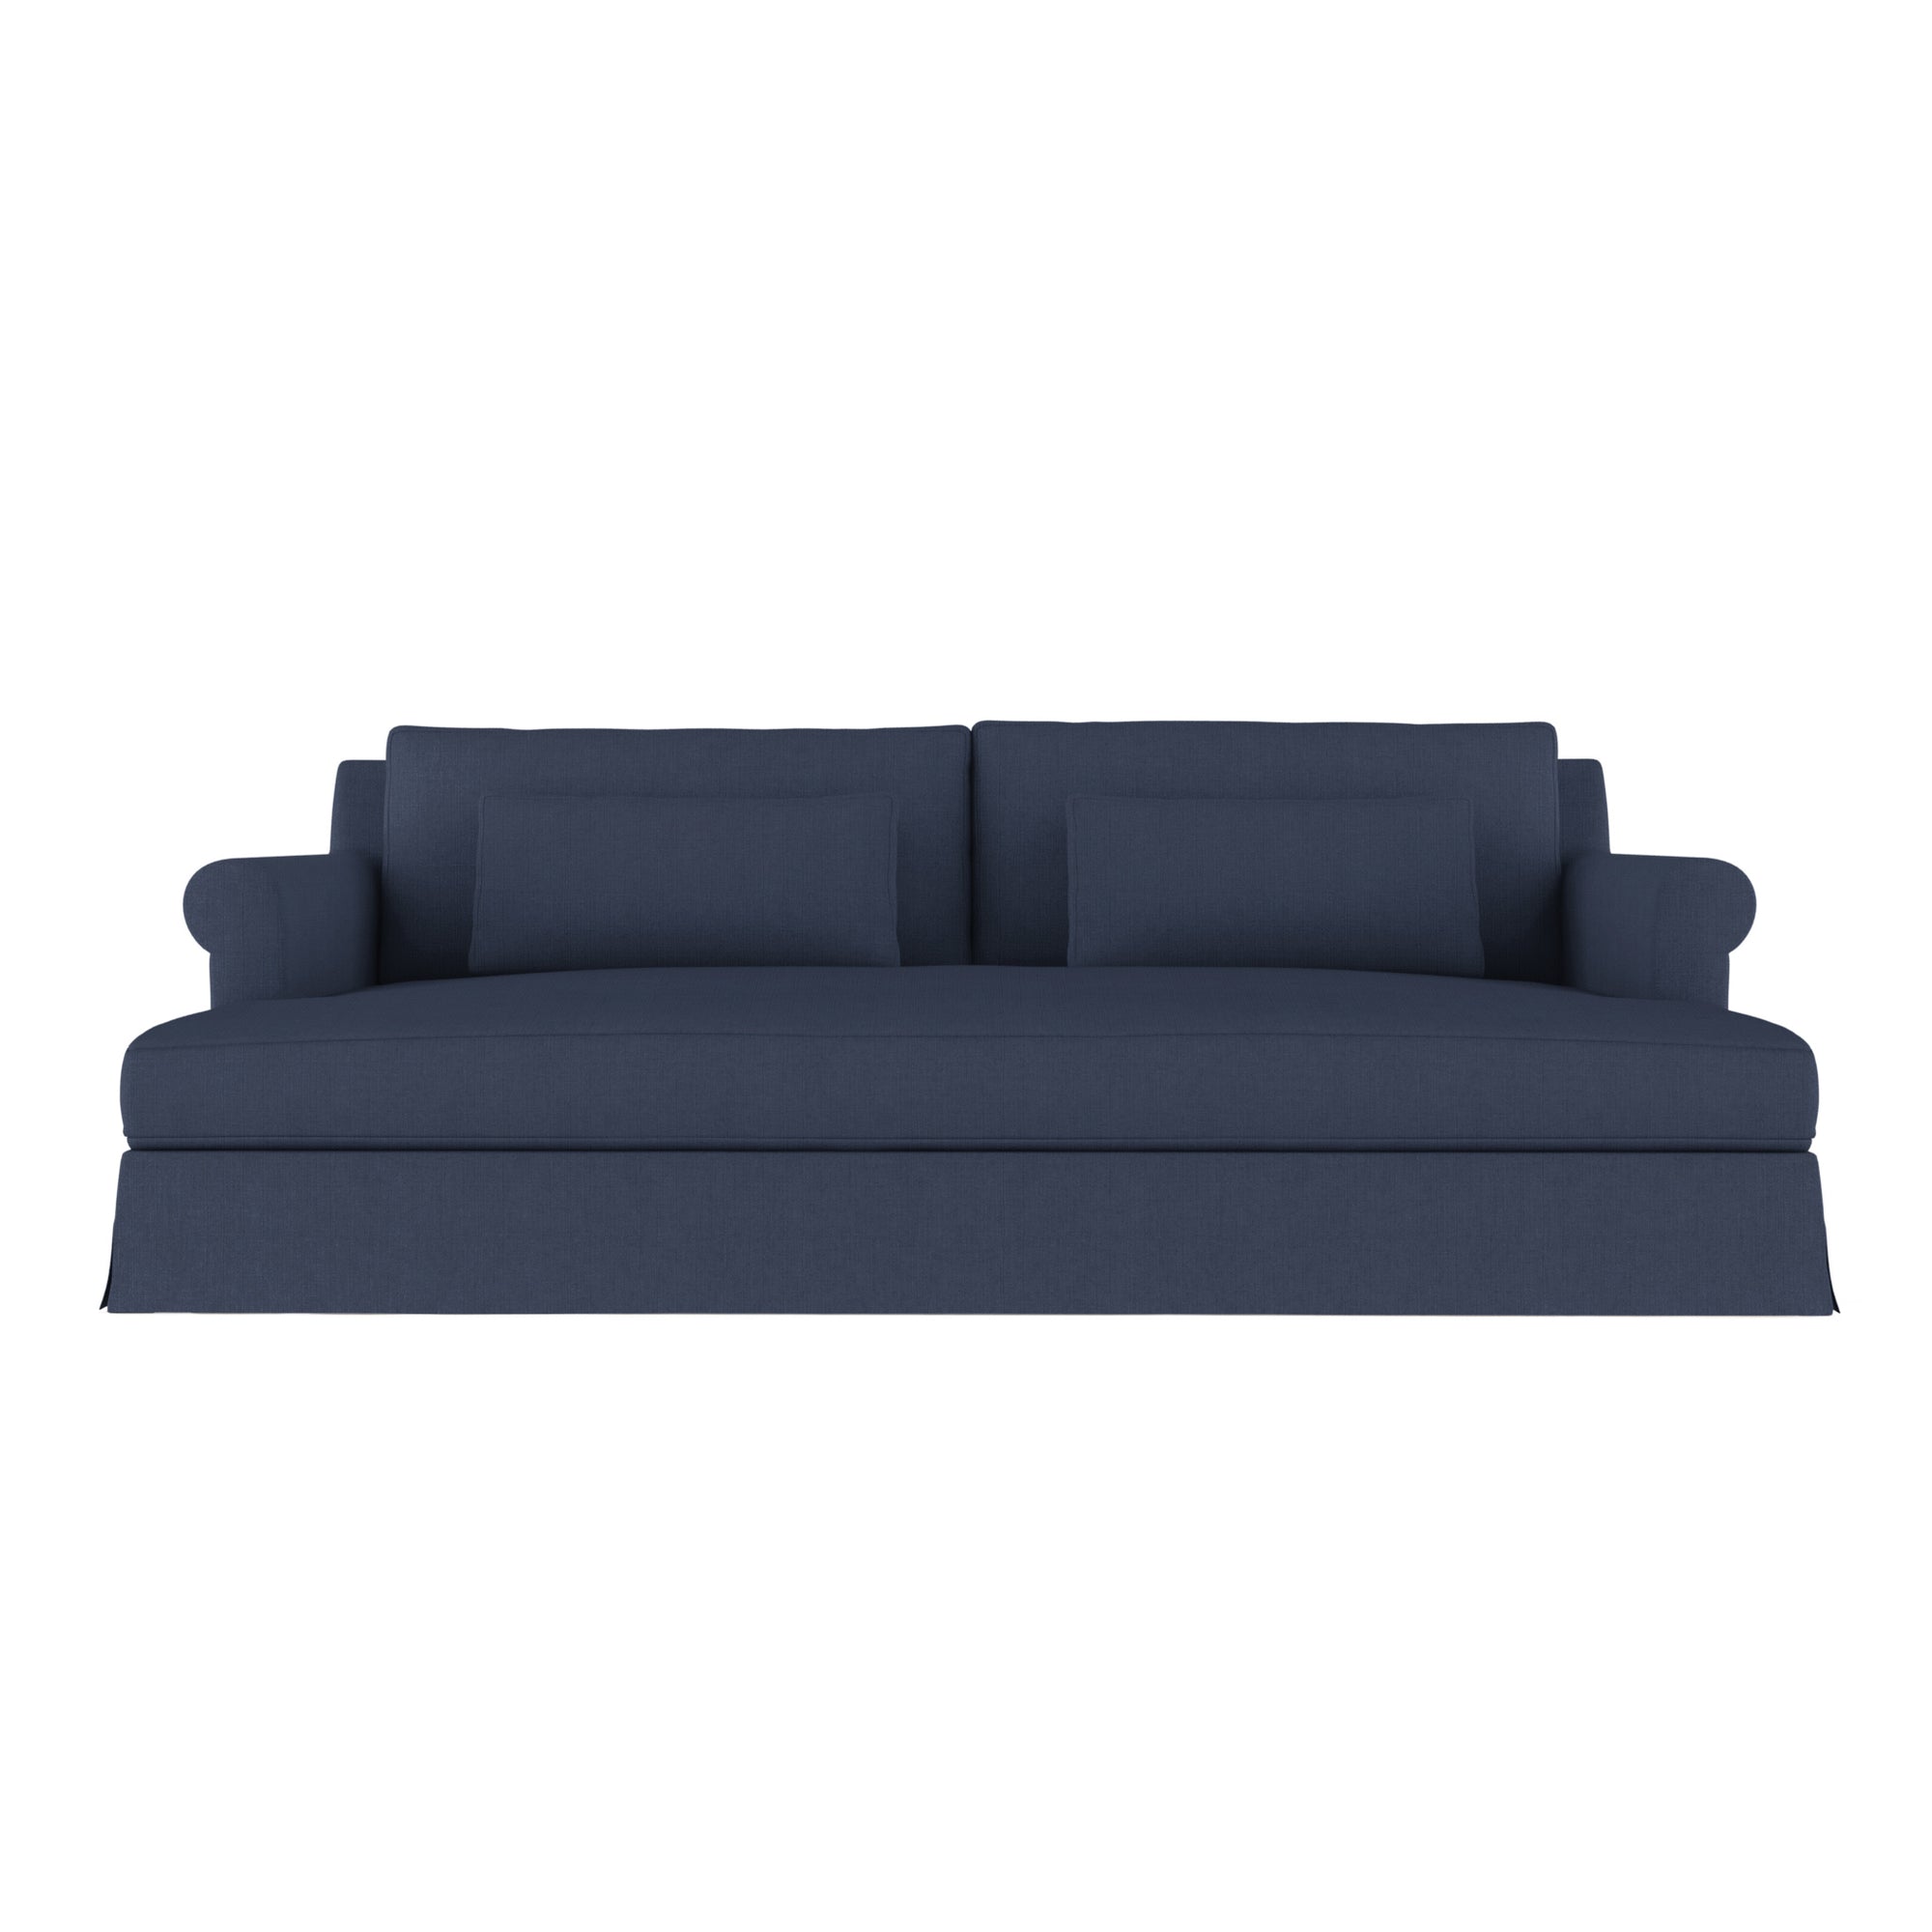 Ludlow Daybed - Blue Print Box Weave Linen